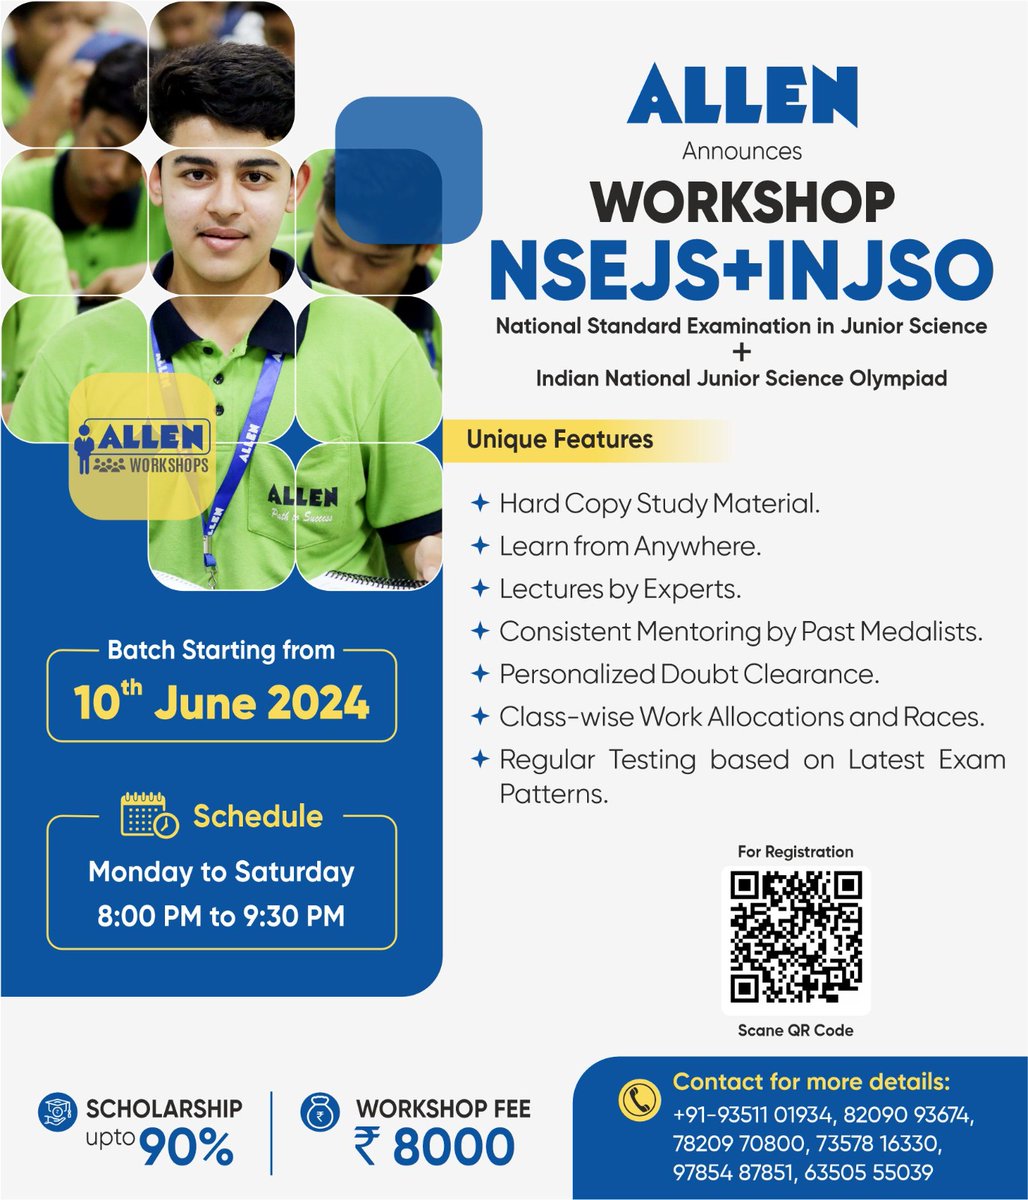 📢 ALLEN is thrilled to announce the NSEJS+INJSO Workshop. 🎉 This workshop is custom-made to provide comprehensive training for those aiming to excel in the National Standard Examination in Junior Science and Indian National Junior Science Olympiad 2024-25. 🔍 Program Details